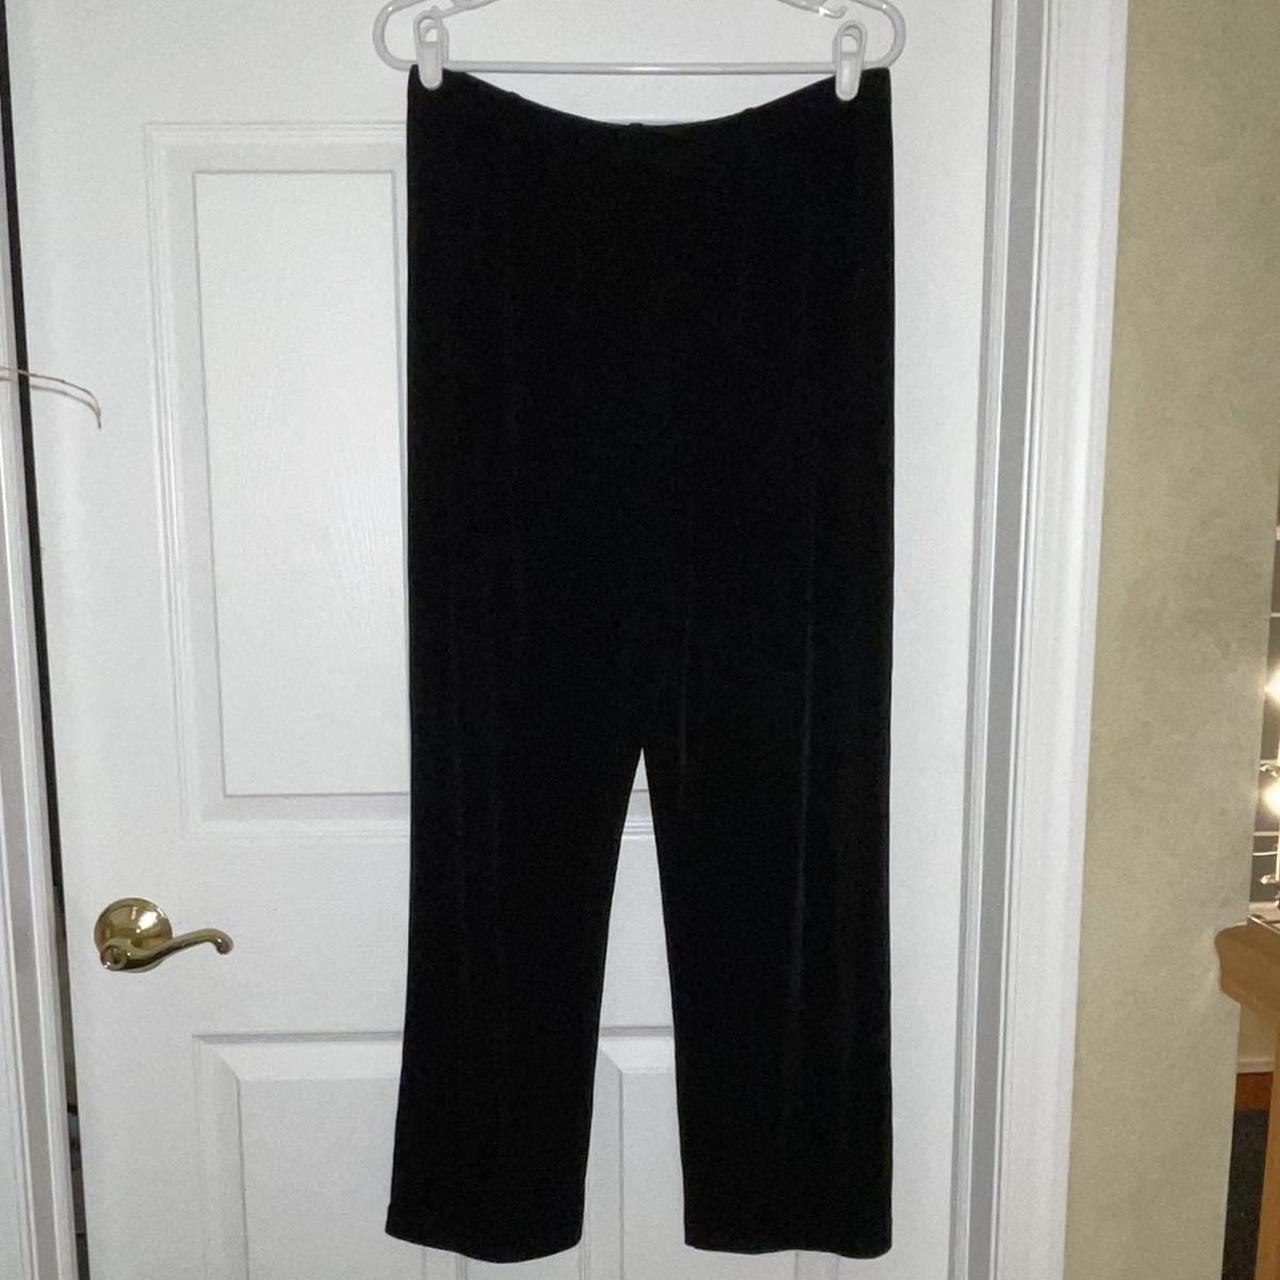 Chicos travelers tan slinky knit pull on pants size - Depop